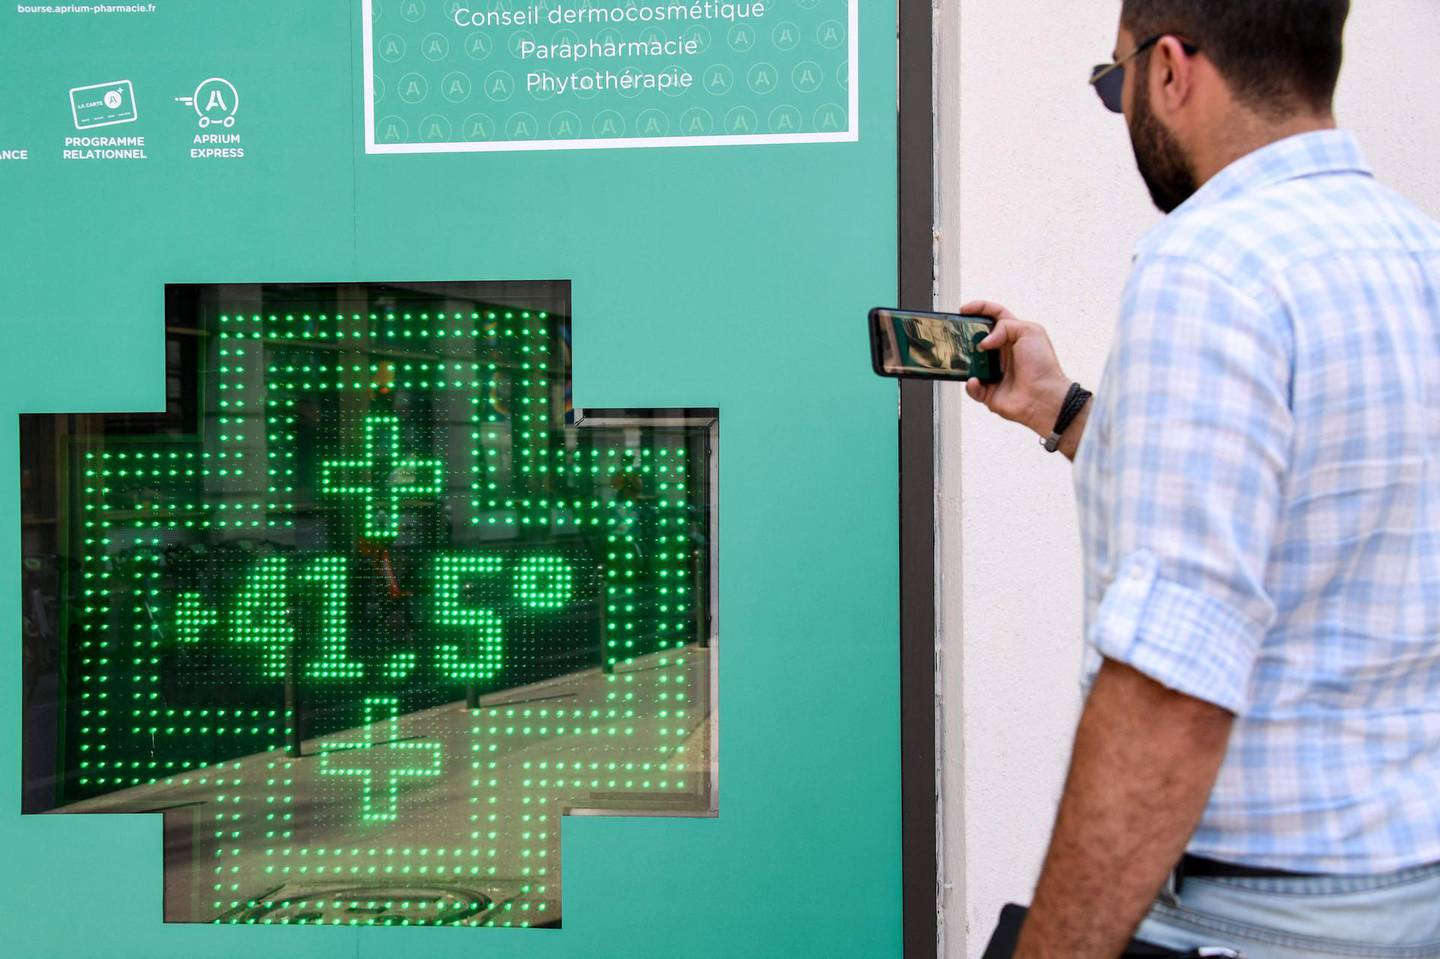 (FILES) In this file photo taken on July 25, 2019, a pedestrian takes a photograph of a  thermometer display showing a temperature of 41,5 degrees Celsius on the exterior of a pharmacy in Paris, as a new heatwave hits northern Europe. The new novel from sci-fi writer Kim Stanley Robinson opens with an unrelenting heatwave in northern India that leaves the reader gasping for air just like the millions of people desperately trying to stay cool enough to survive. The scene described and its grim outcome may be closer to science than fiction, according to the revised draft of a landmark report from the UN's climate science advisory panel obtained by AFP. / AFP / Bertrand GUAY
